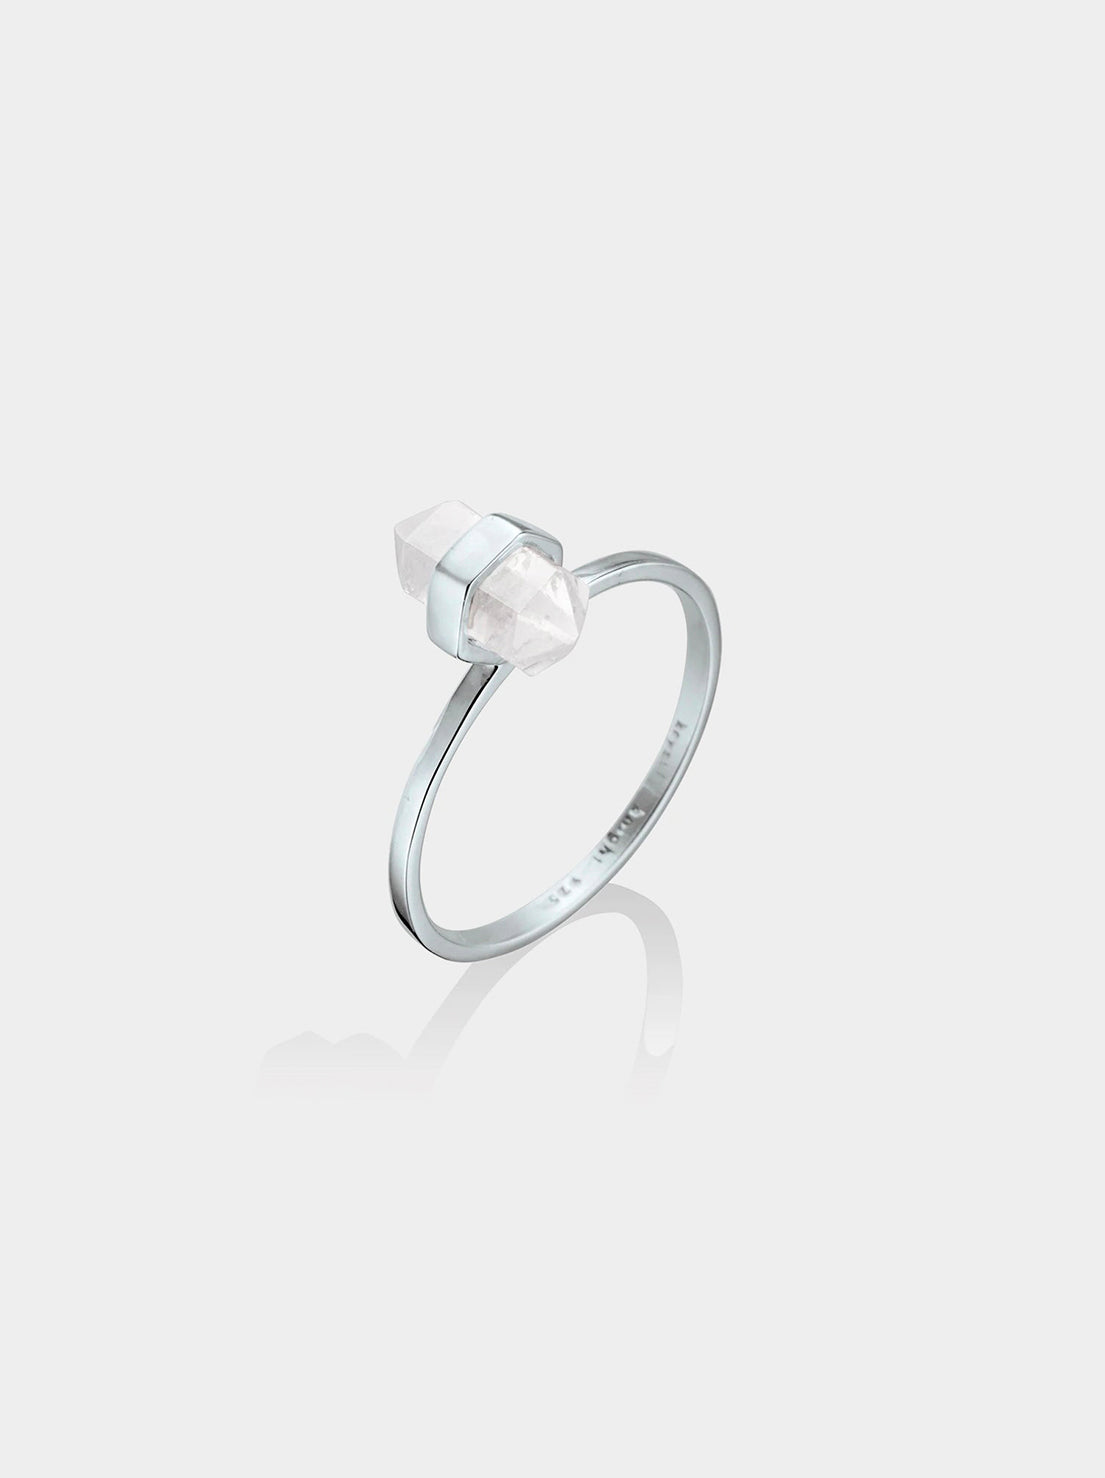 Krystle Knight - Tiny Calm Crystal Ring - Clear Quartz - Sterling Silver